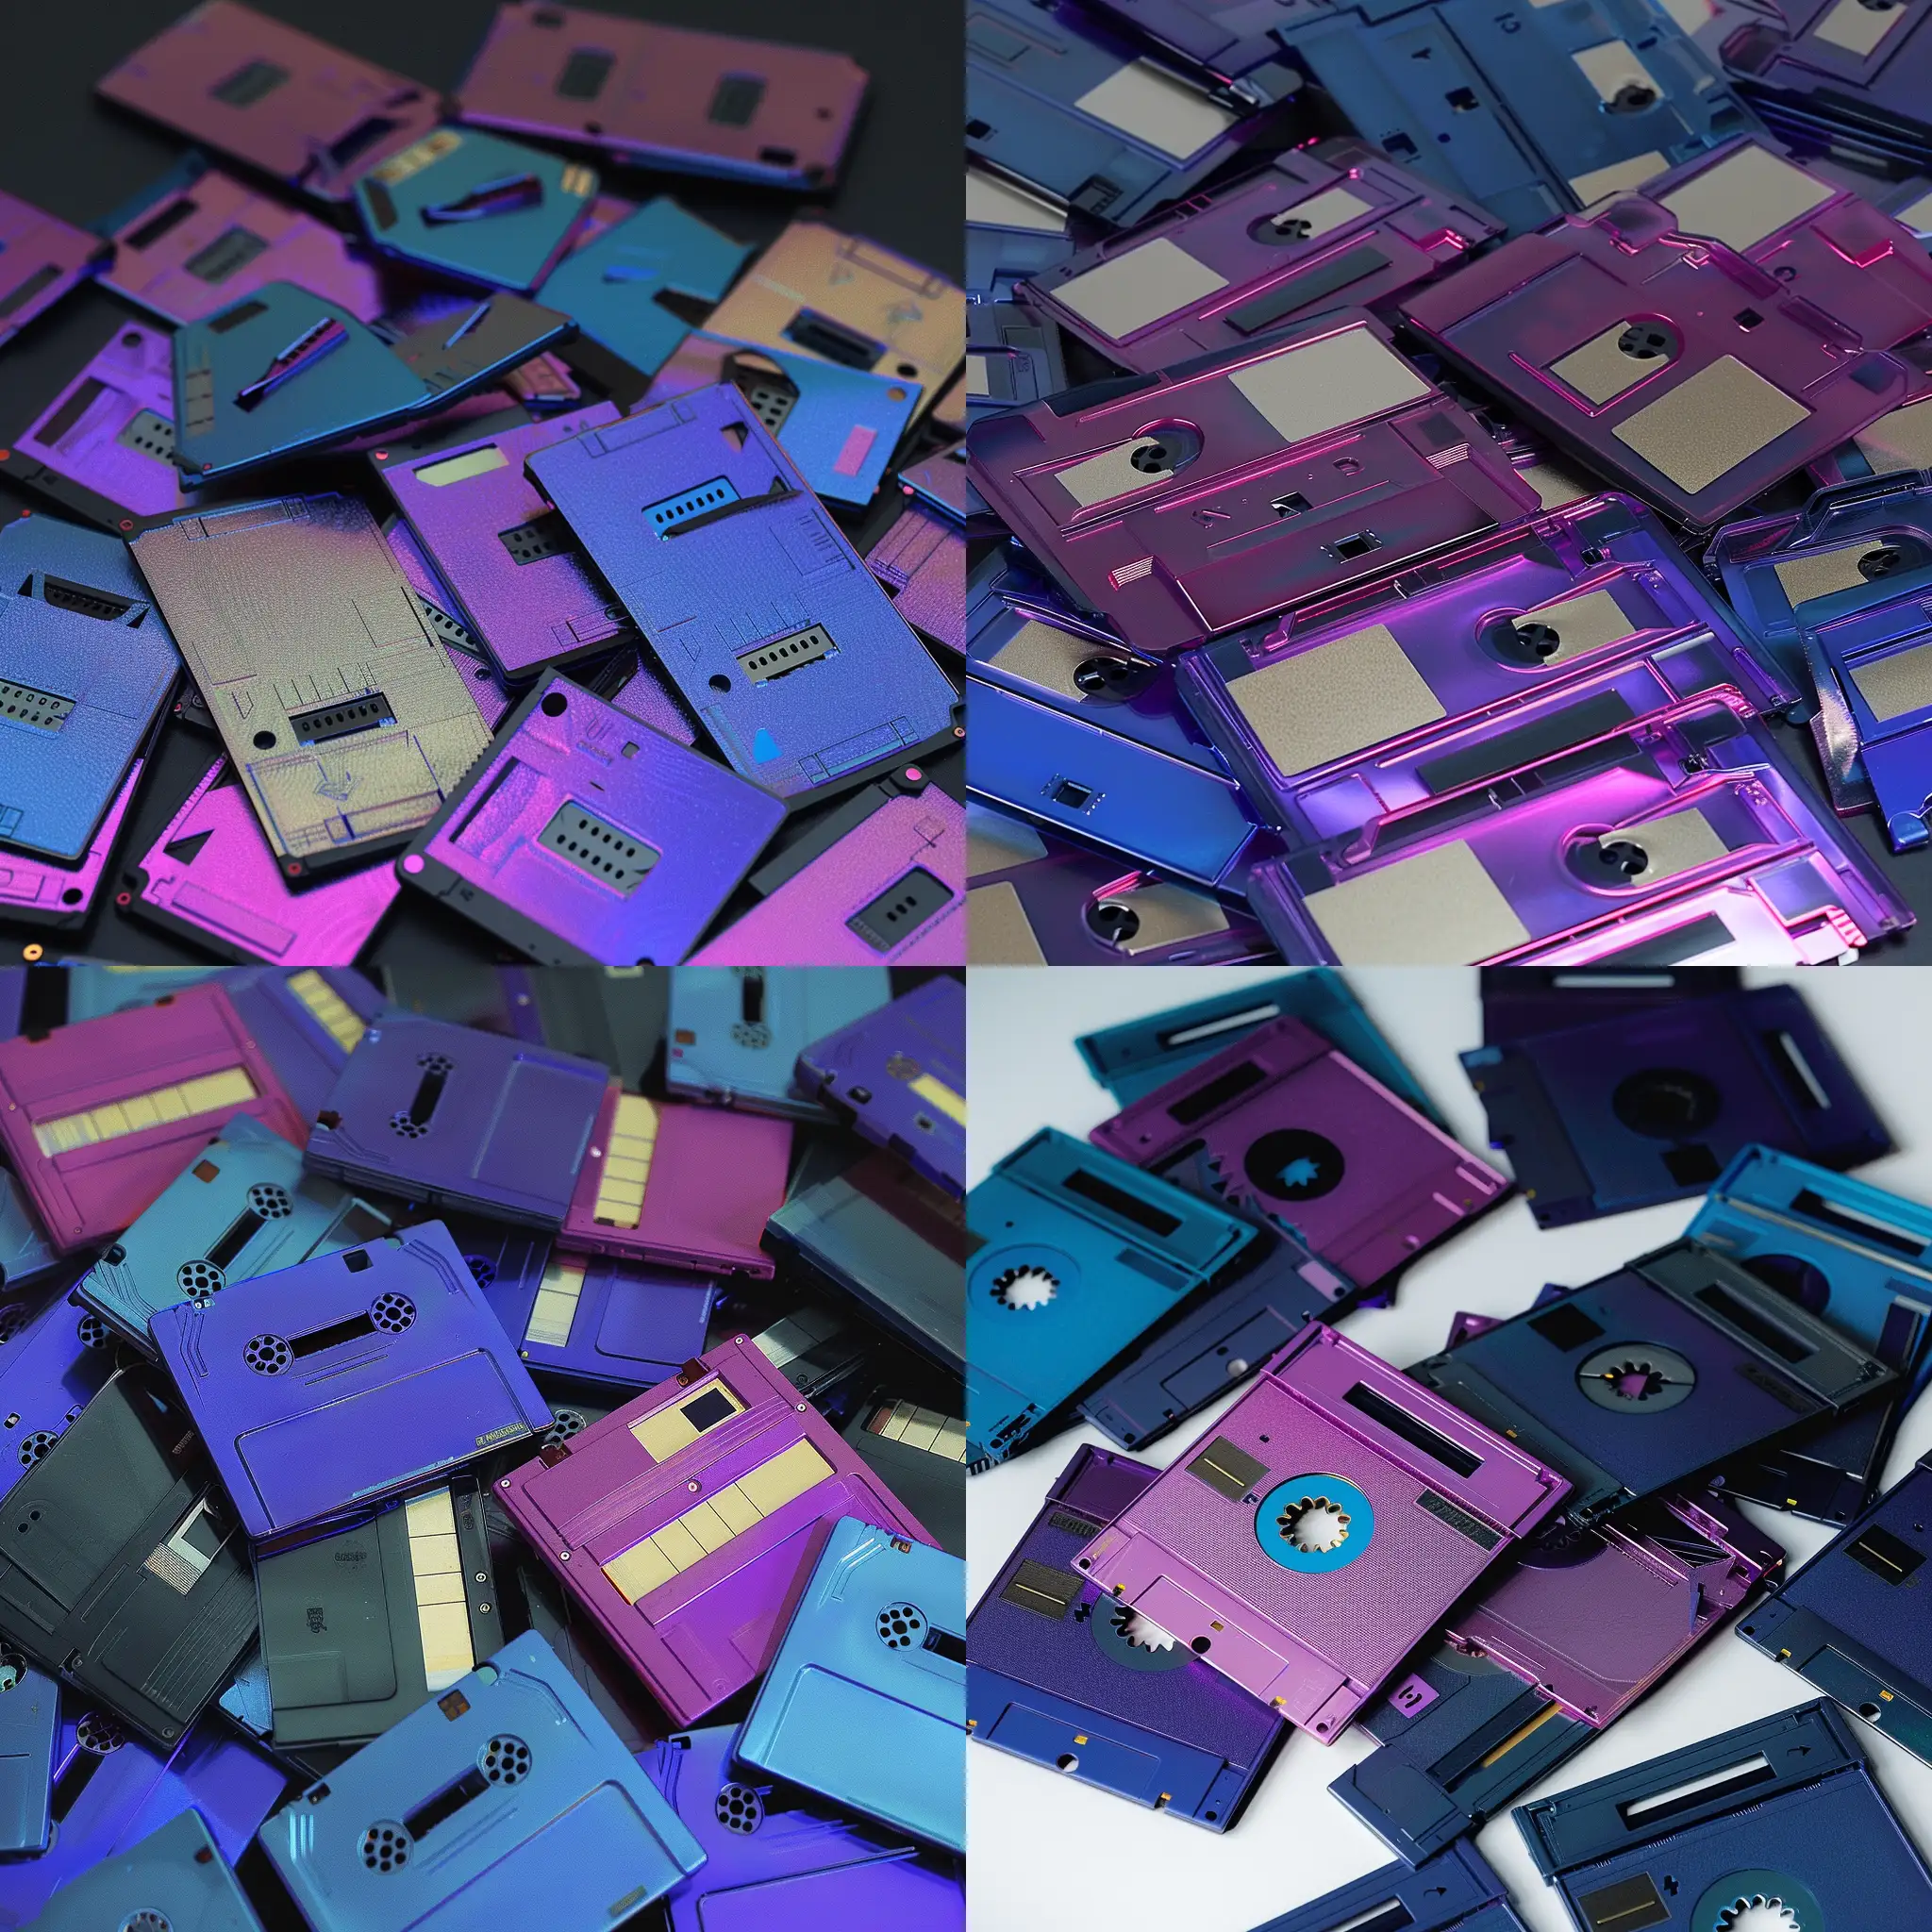 Create an image of a pile of many purple-ish and blue-ish floppy disks